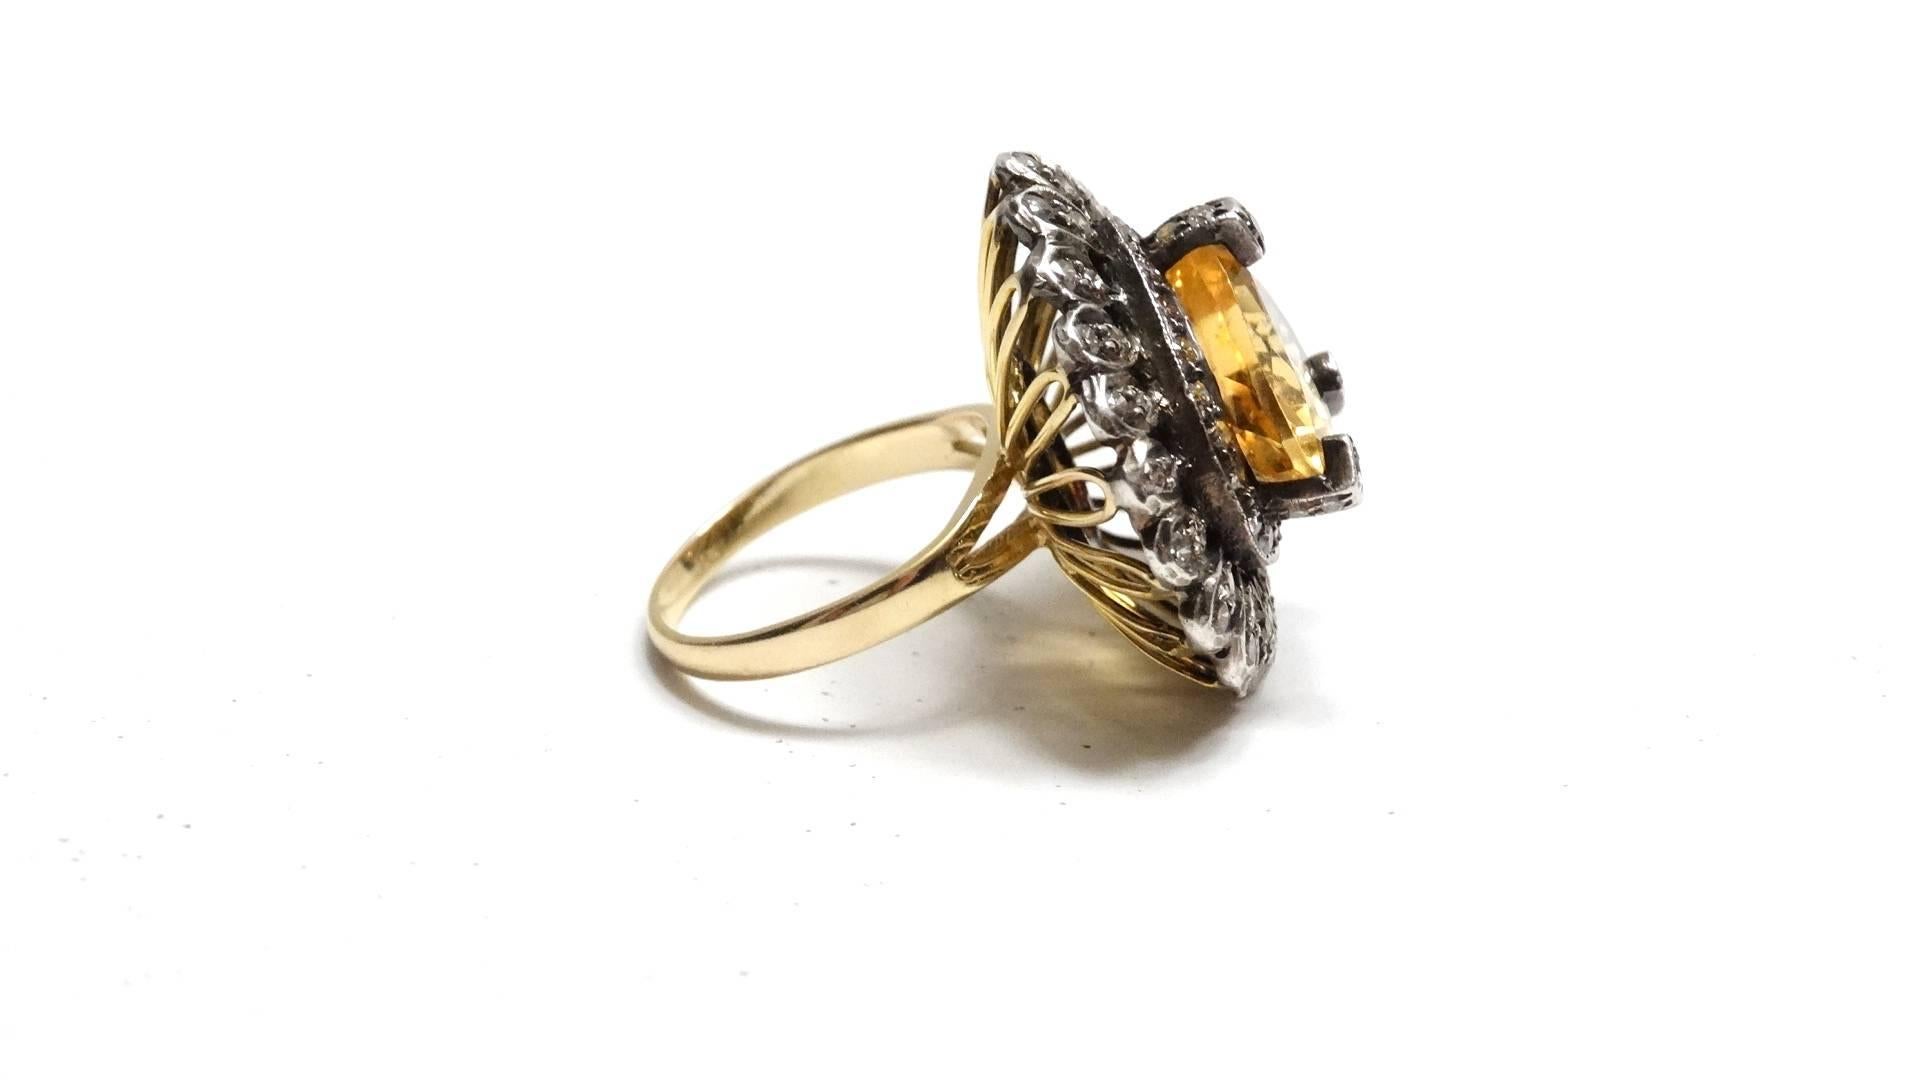 This fabulous 14 karat yellow and white gold ring boasts a beautiful natural Citrine.  The Citrine is 8.60 carats which is hand cut, beautifully polished and surrounded by a halo of Old Cut Diamonds. 44 sparkling Diamonds to be exact. Beautiful